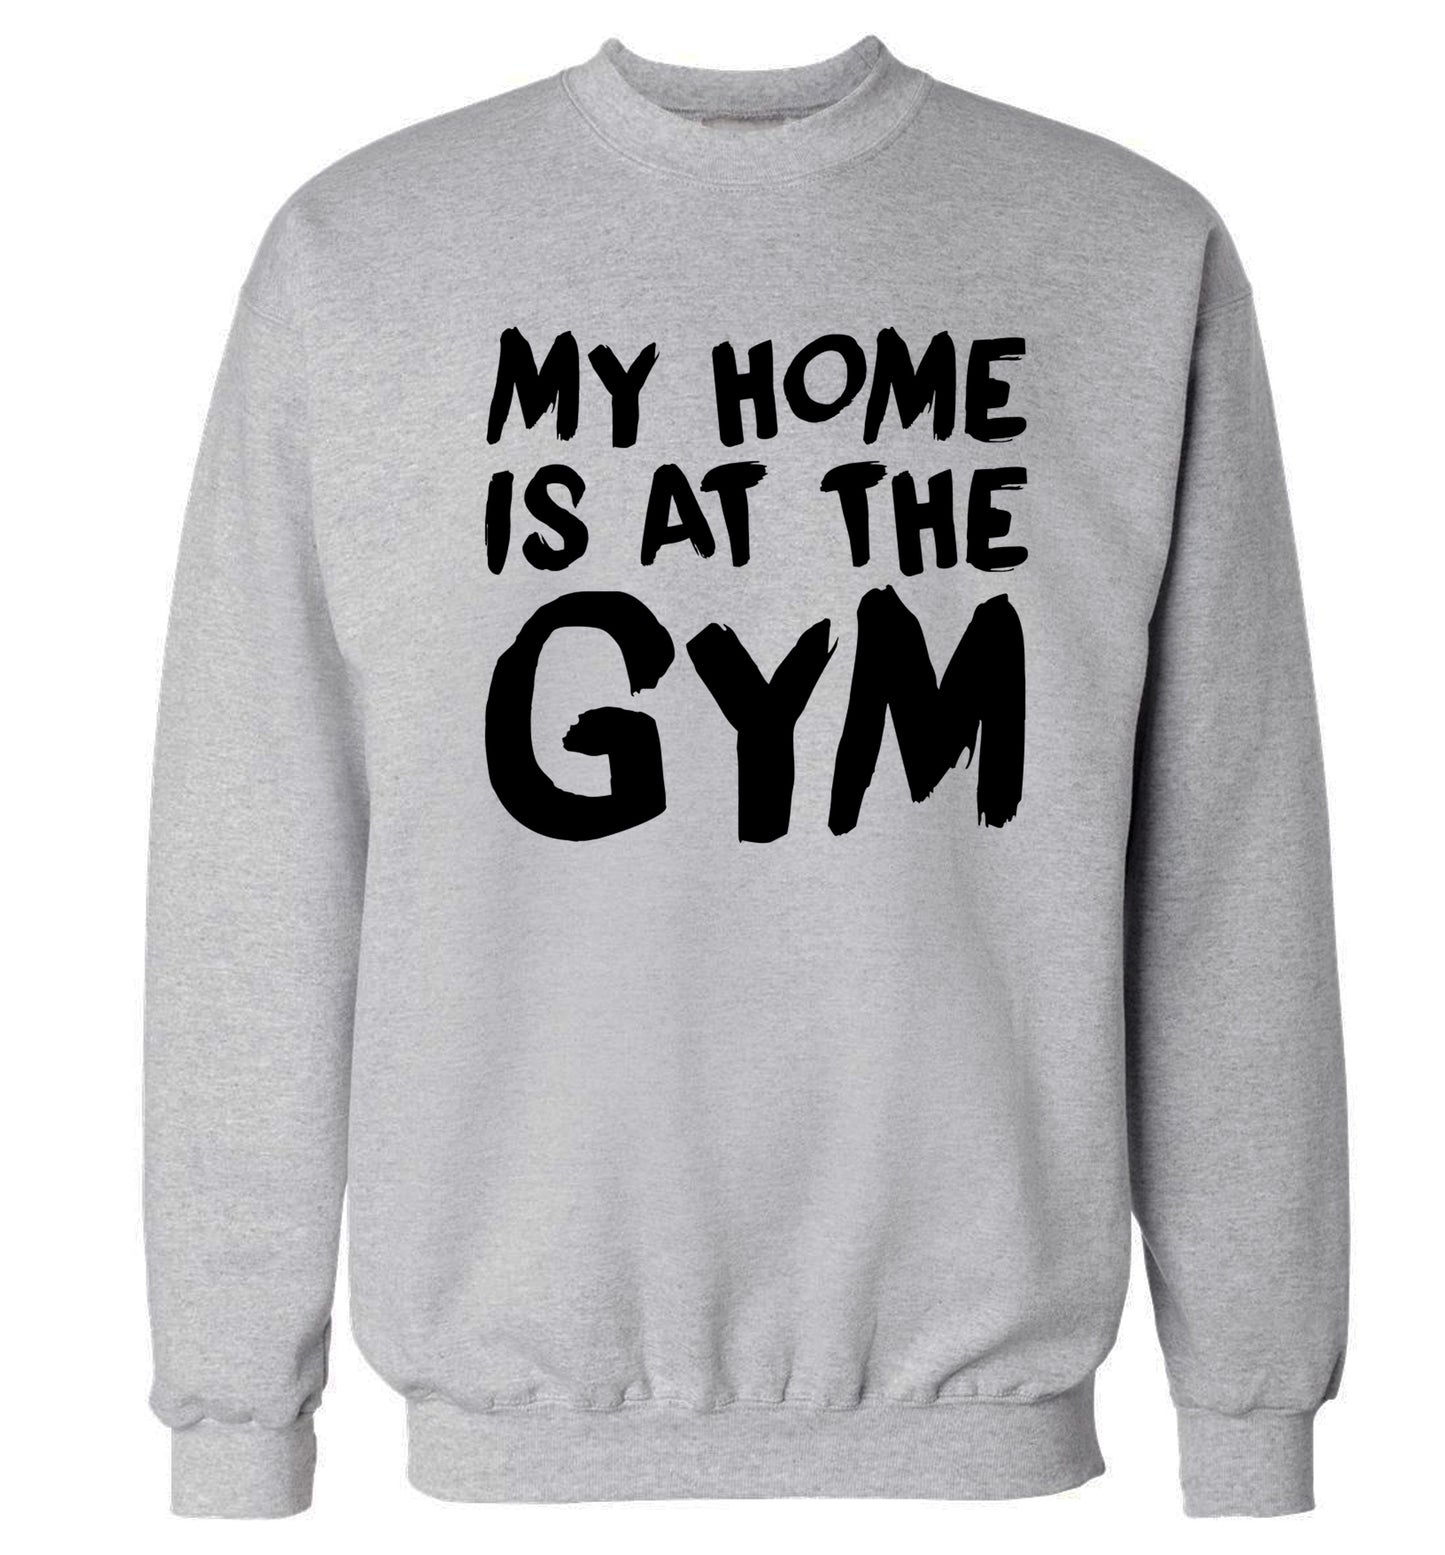 My home is at the gym Adult's unisex grey Sweater 2XL